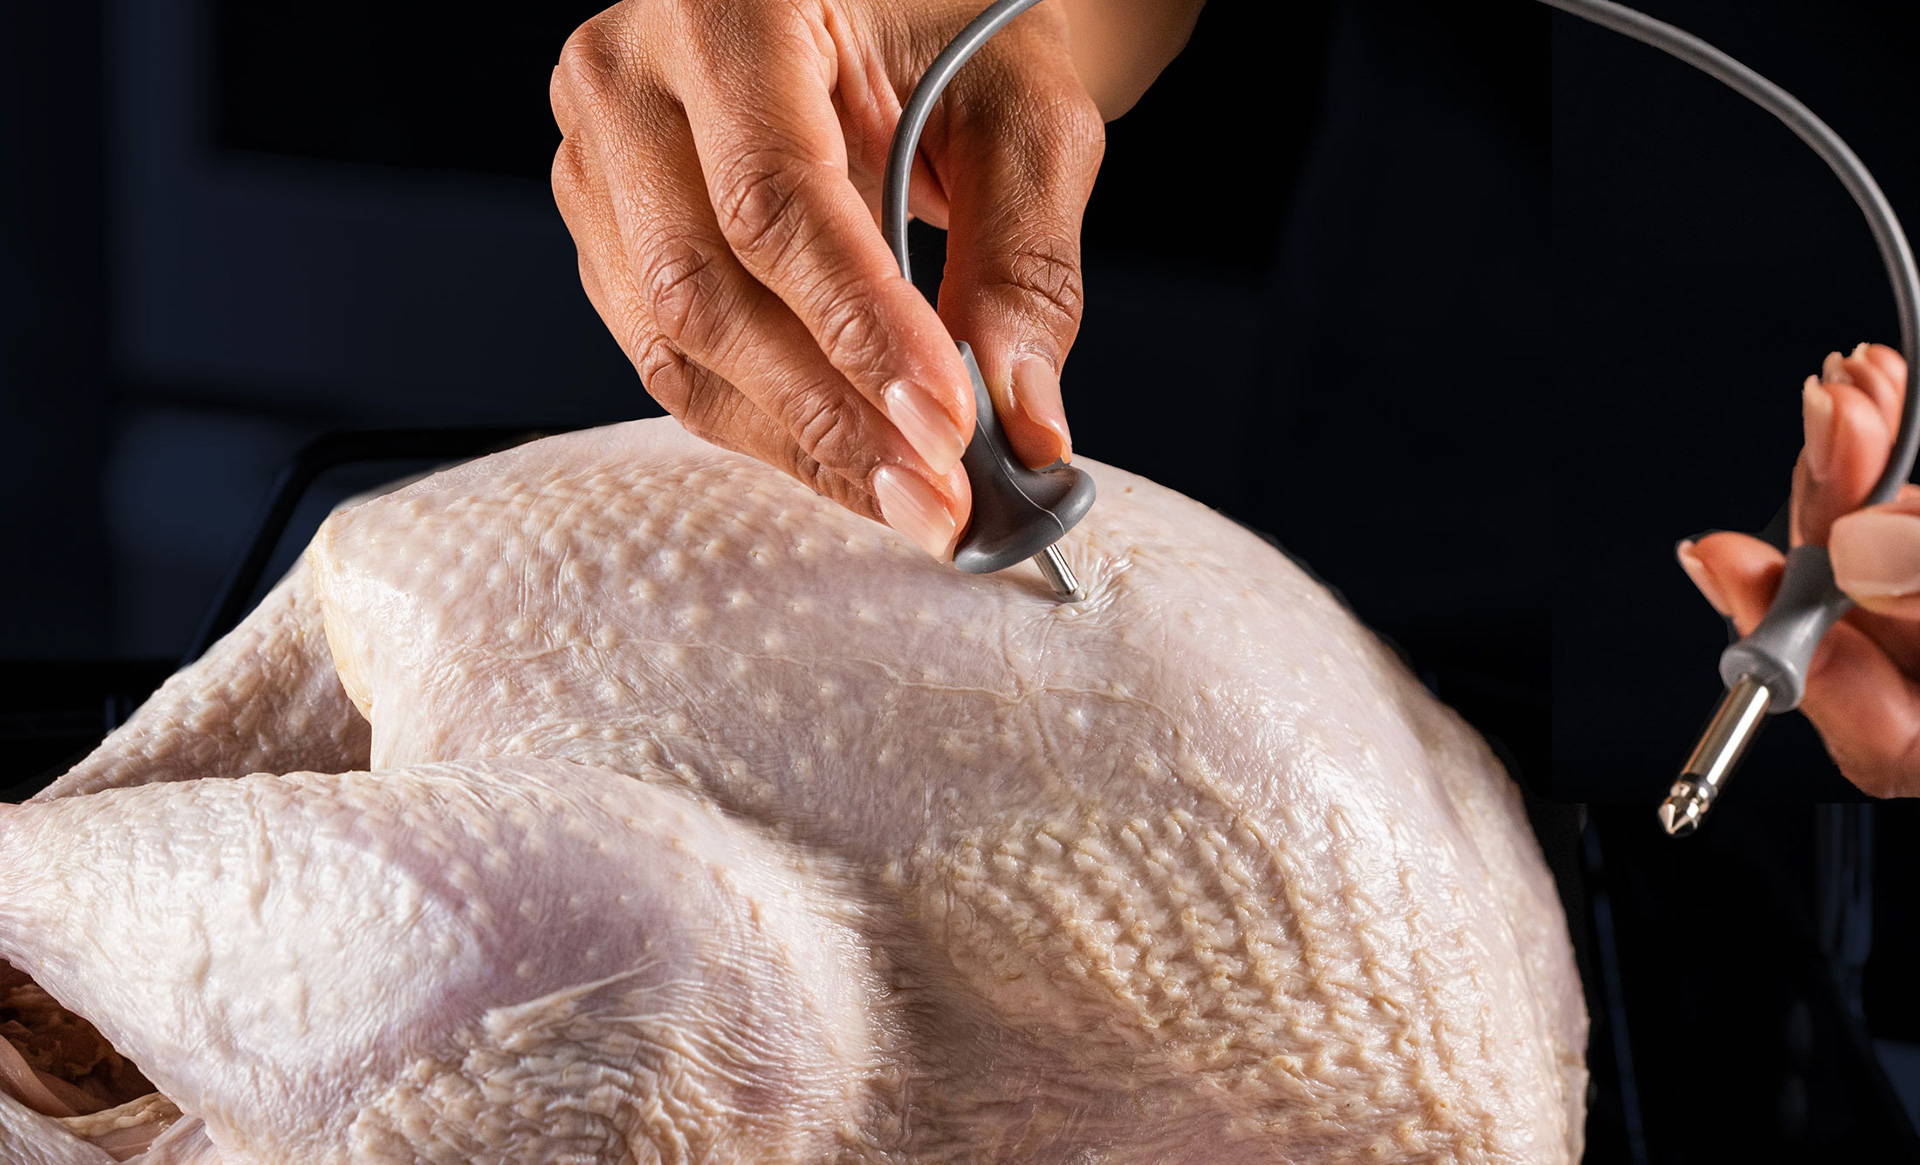 Hand inserting the probe into the breast of the uncooked turkey